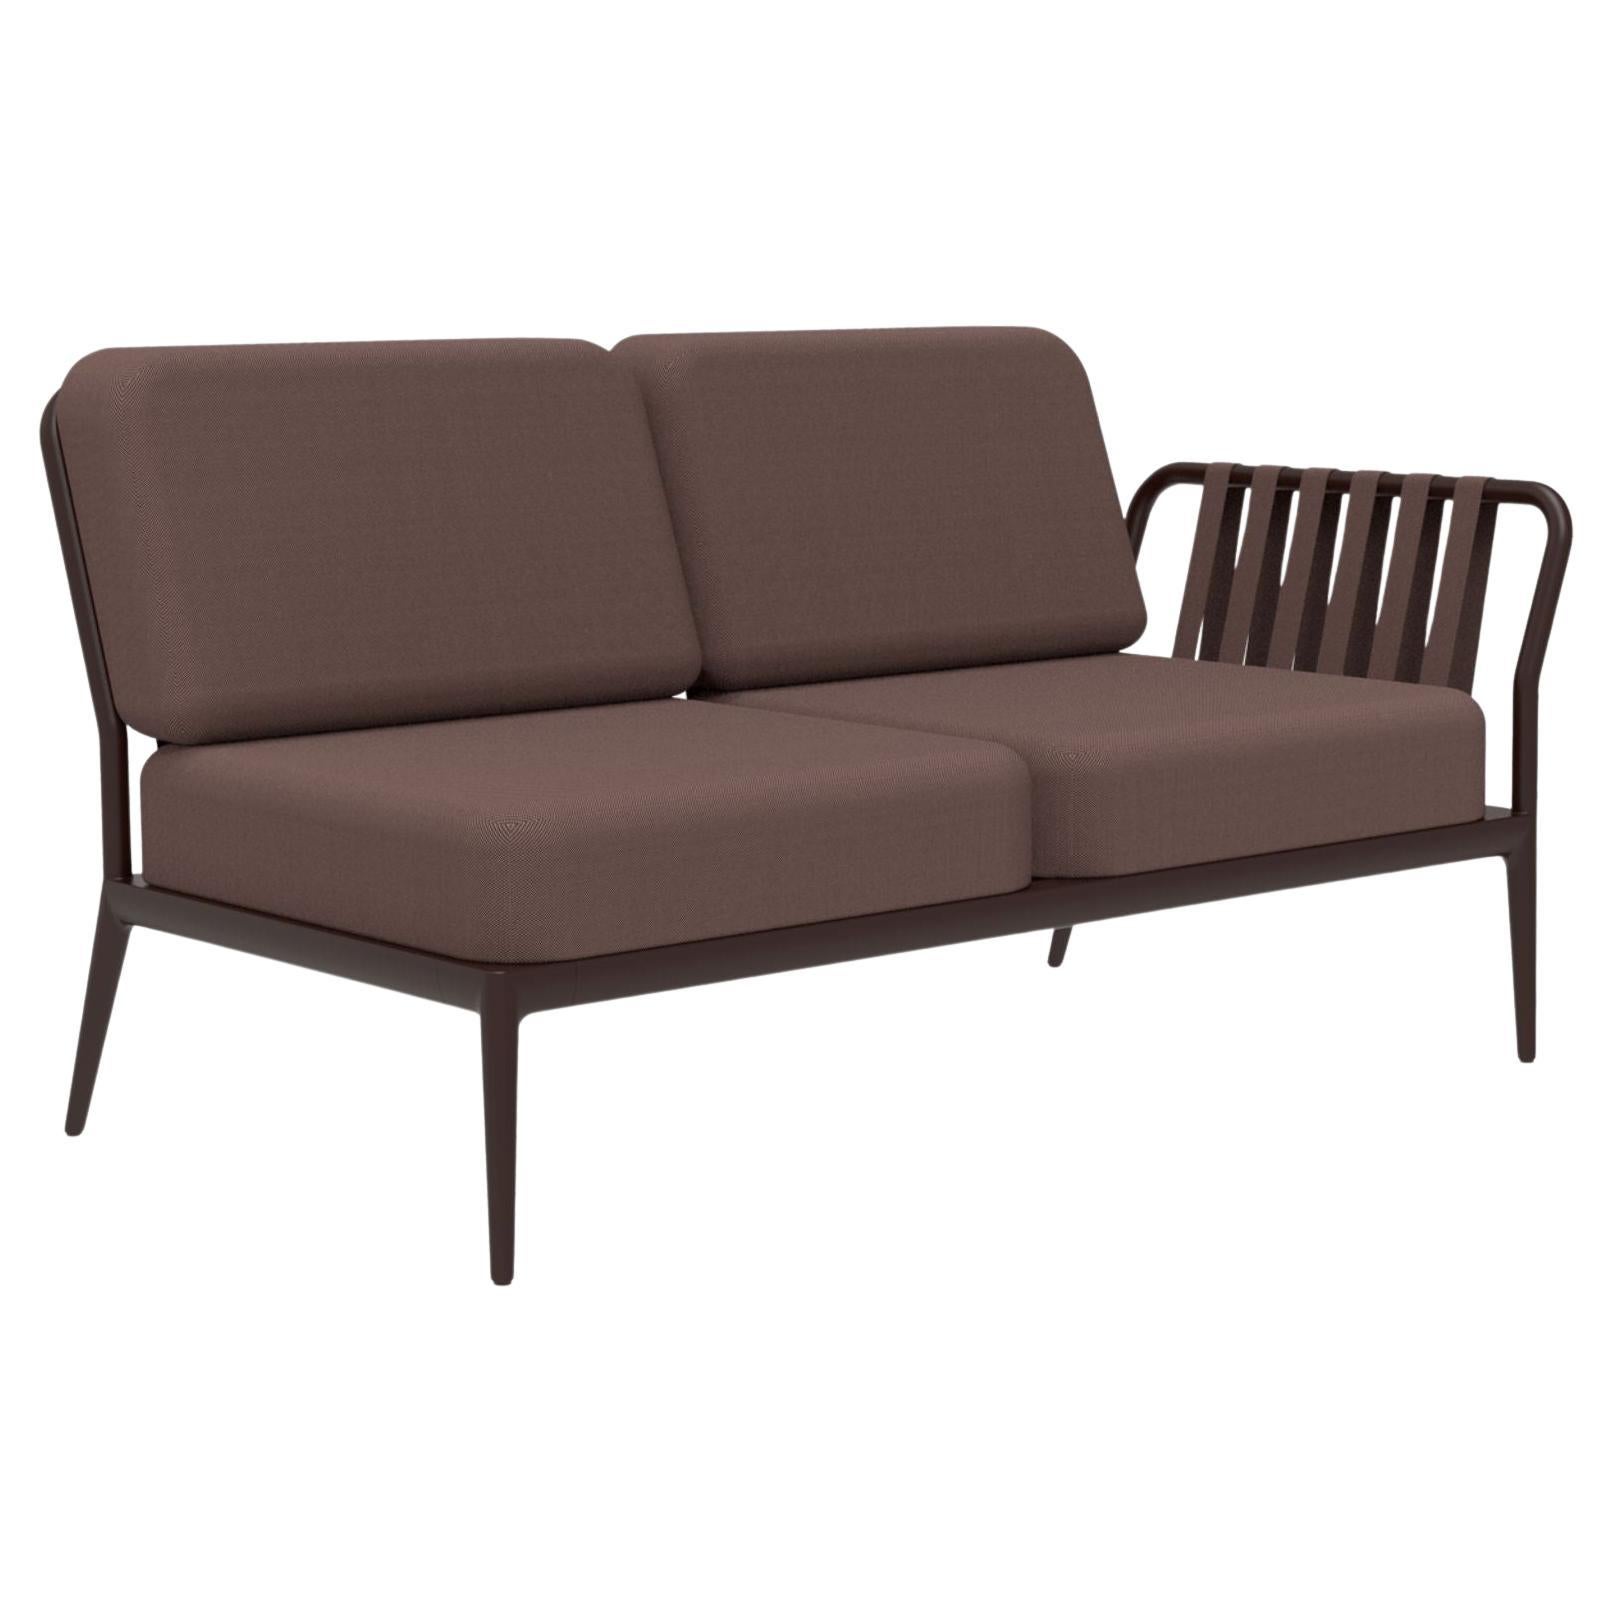 Ribbons Chocolate Double Left Modular Sofa by Mowee For Sale